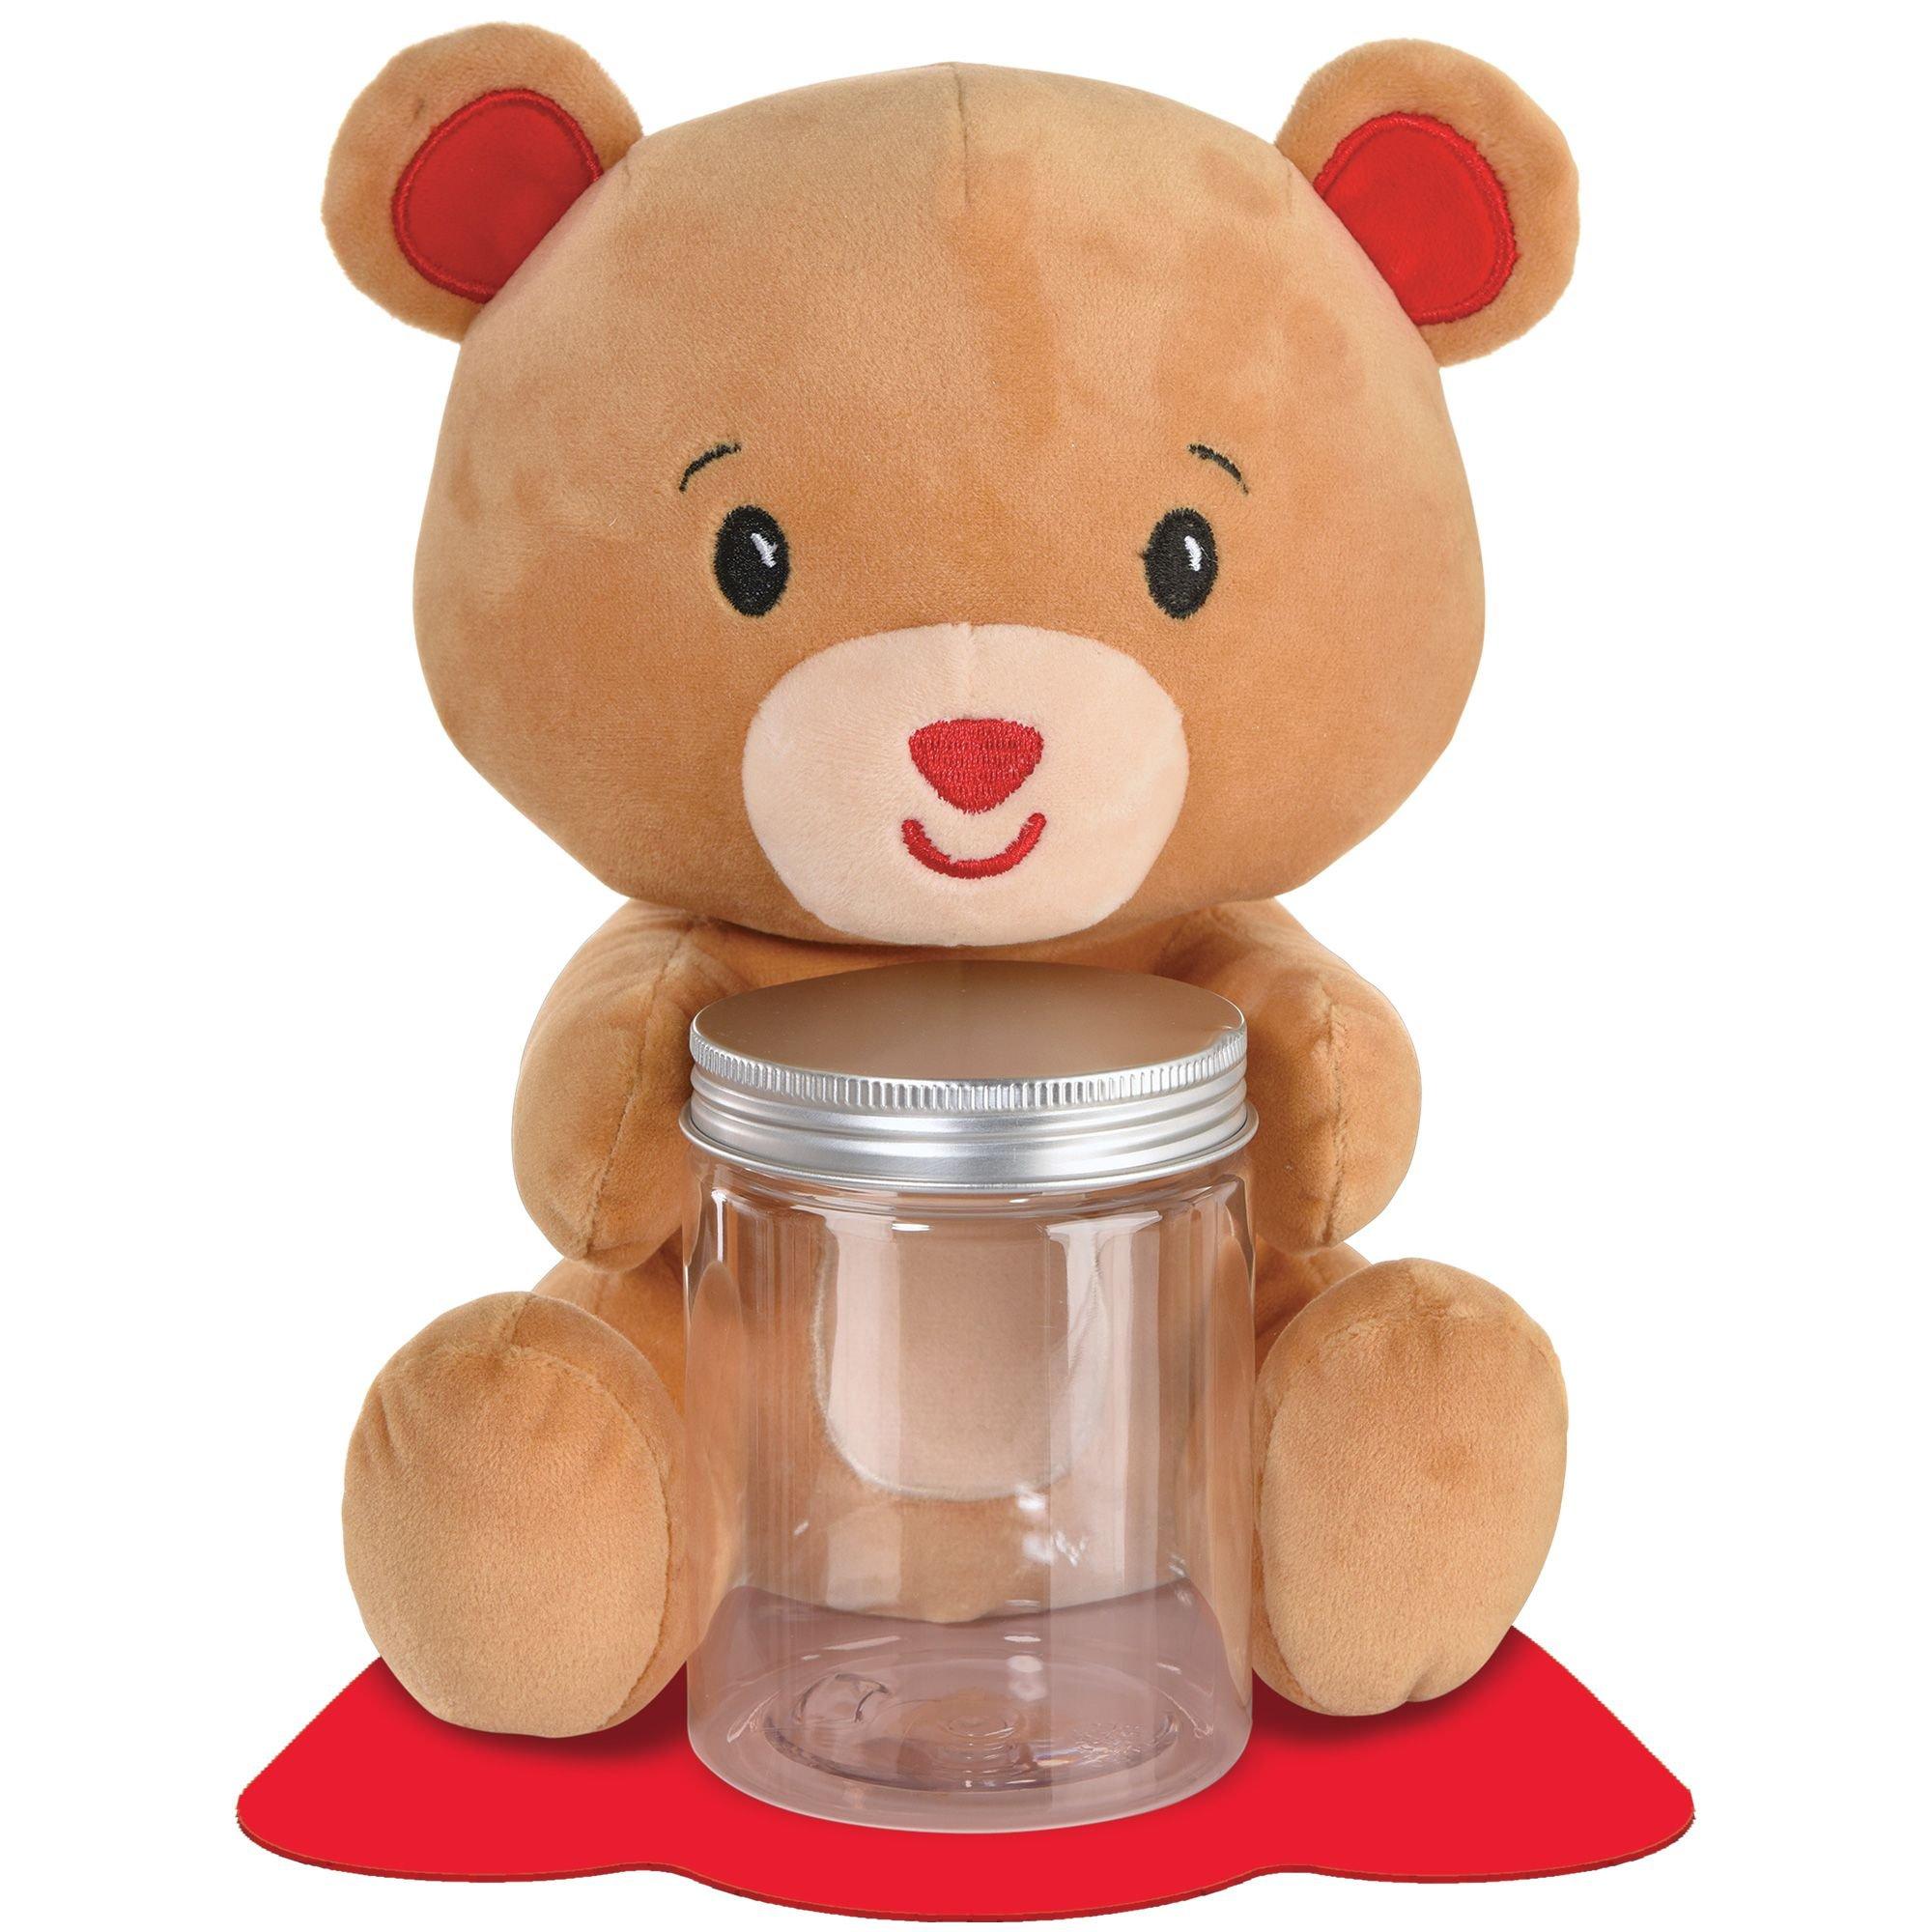 Brown & Red Plush Bear Balloon Weight with Plastic Jar, 5.9oz